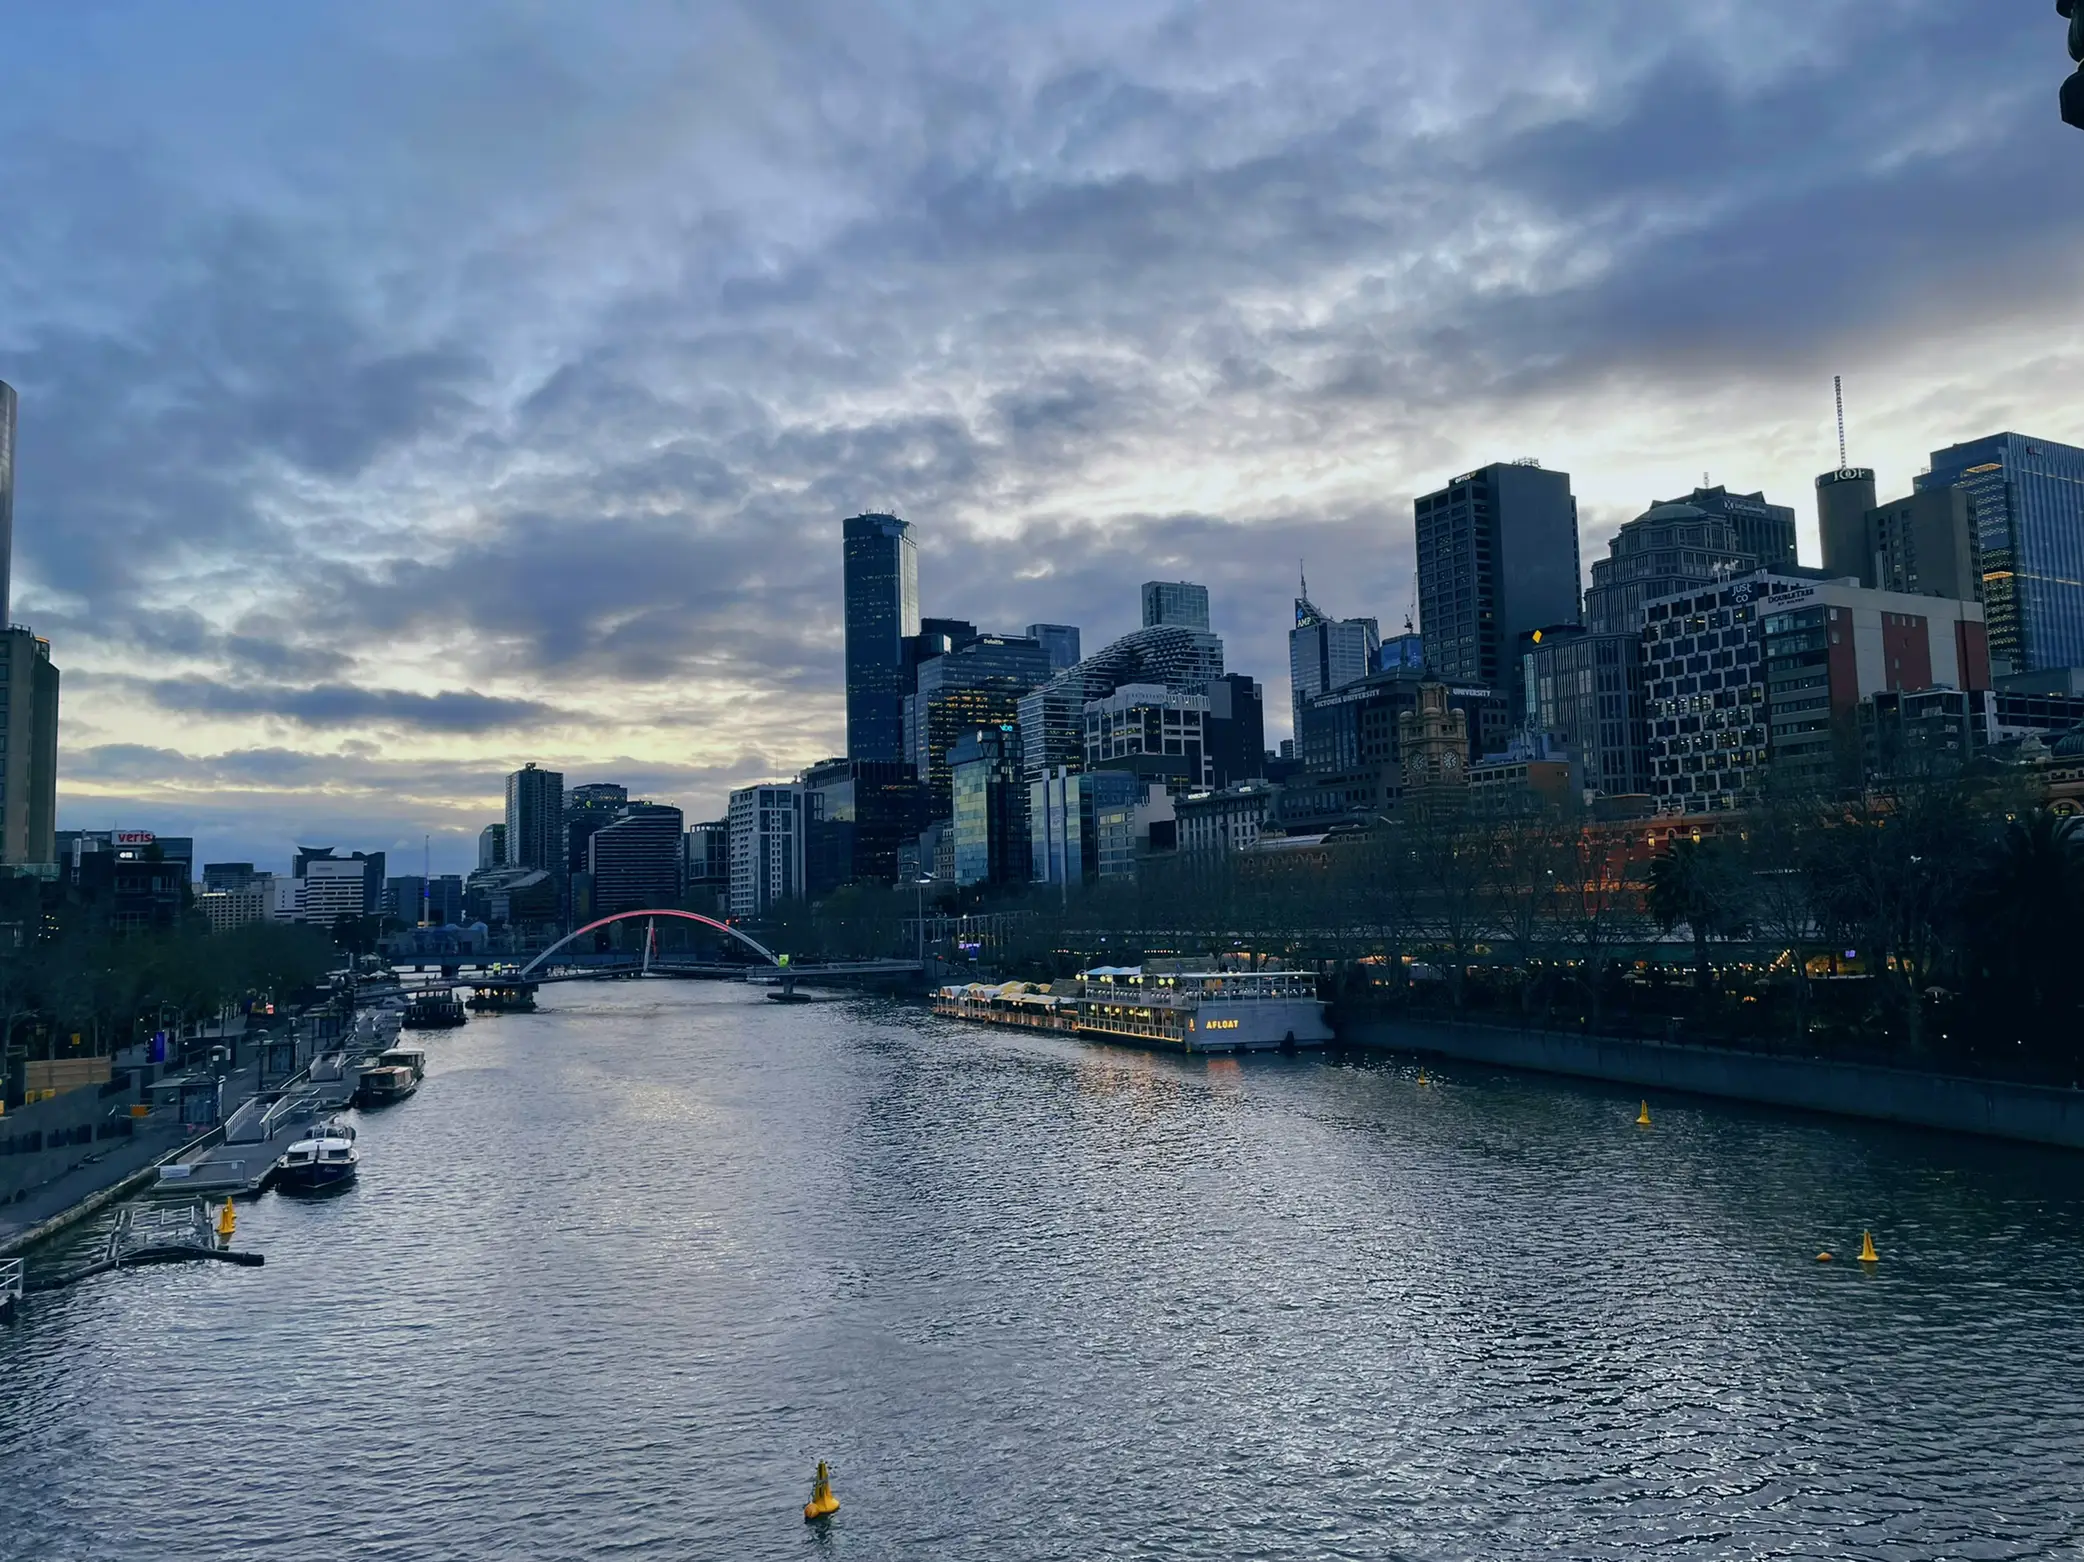 Melbourne @ 6pm, Gallery posted by Dominic夢凡心